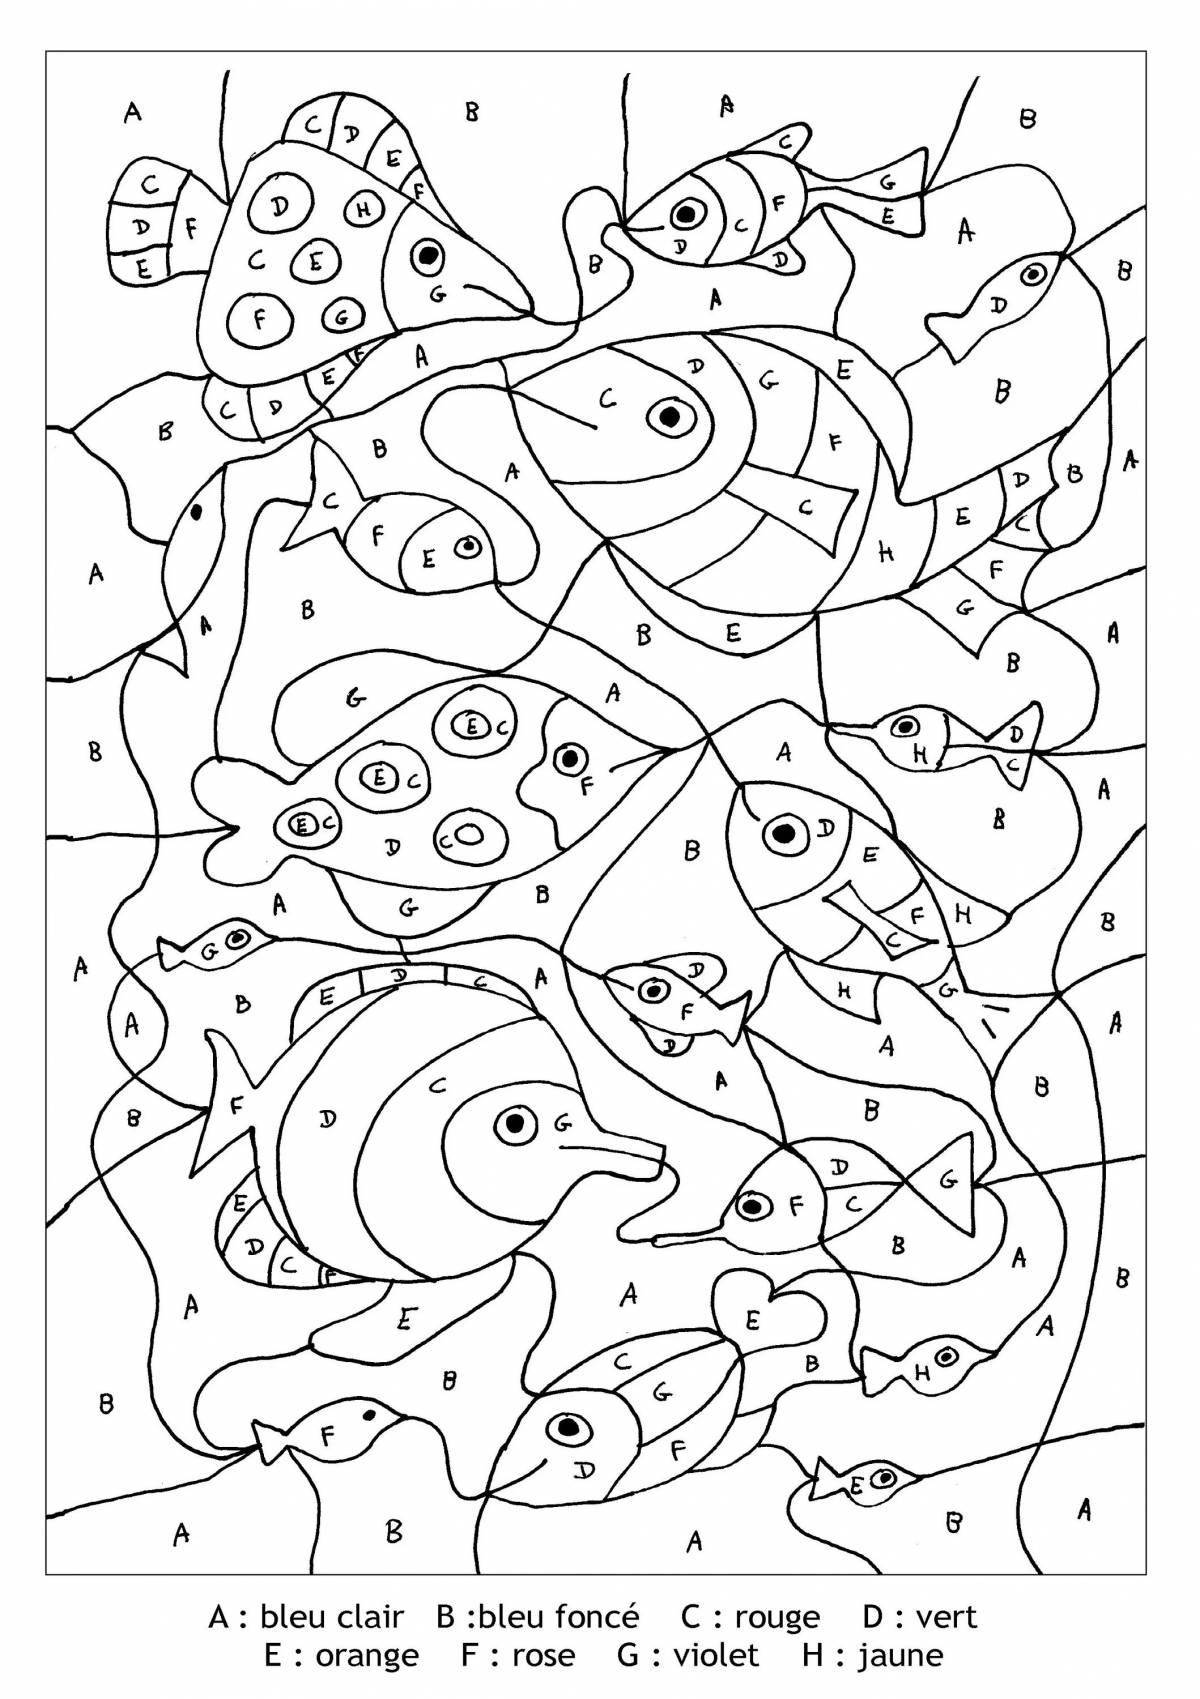 Exciting fish by numbers coloring book